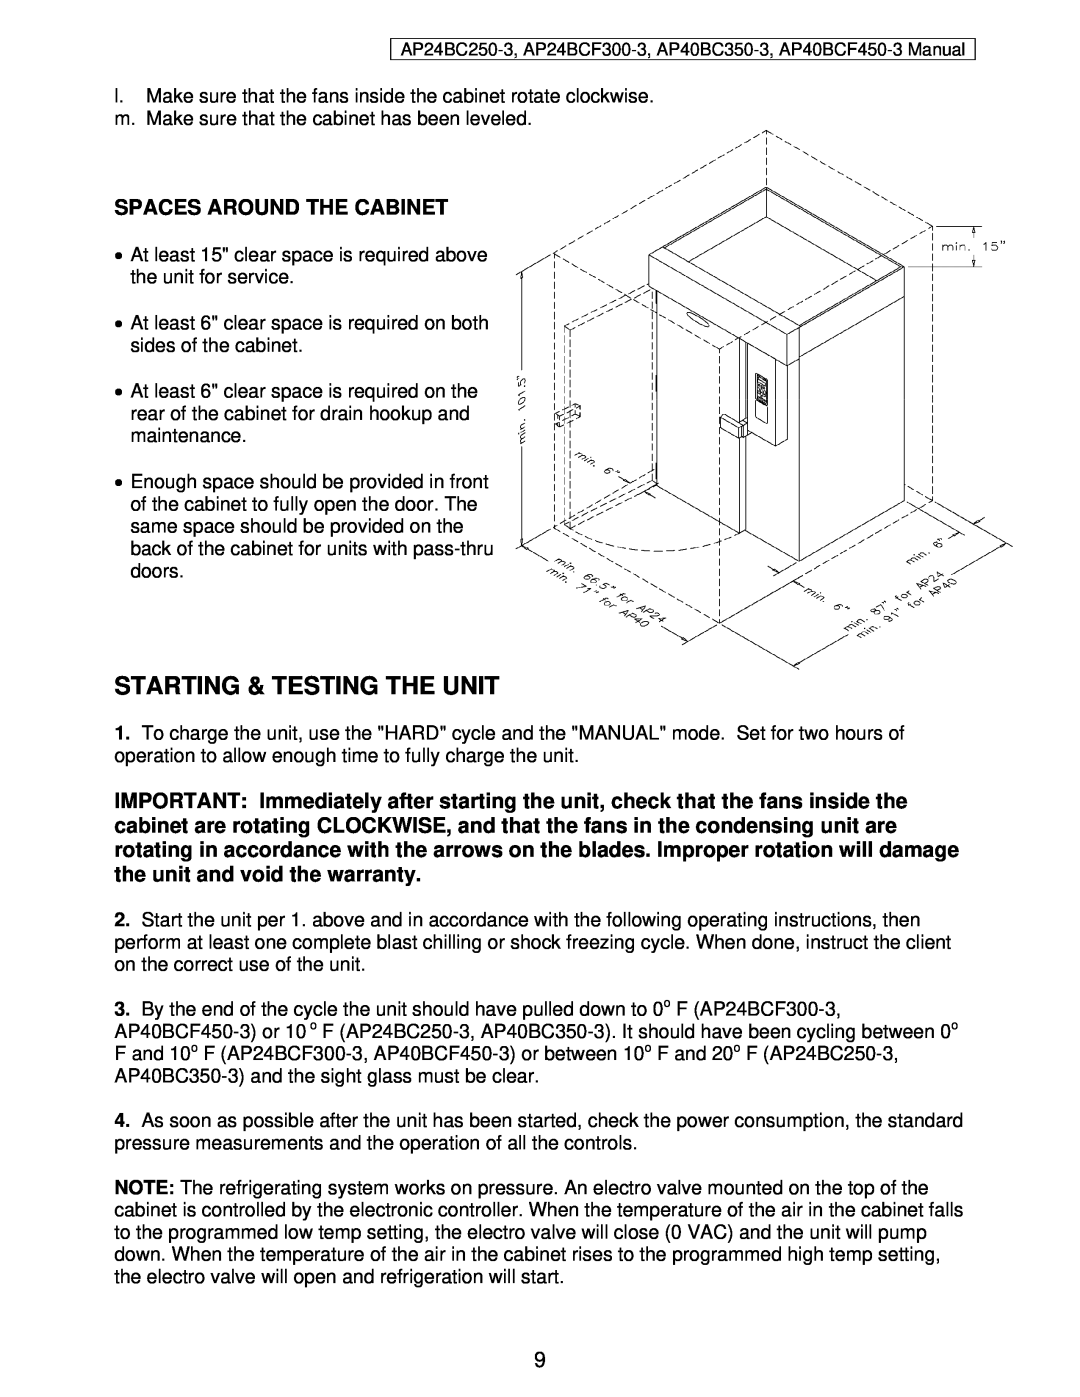 American Panel AP24BC250-3 user manual Starting & Testing The Unit, Spaces Around The Cabinet 